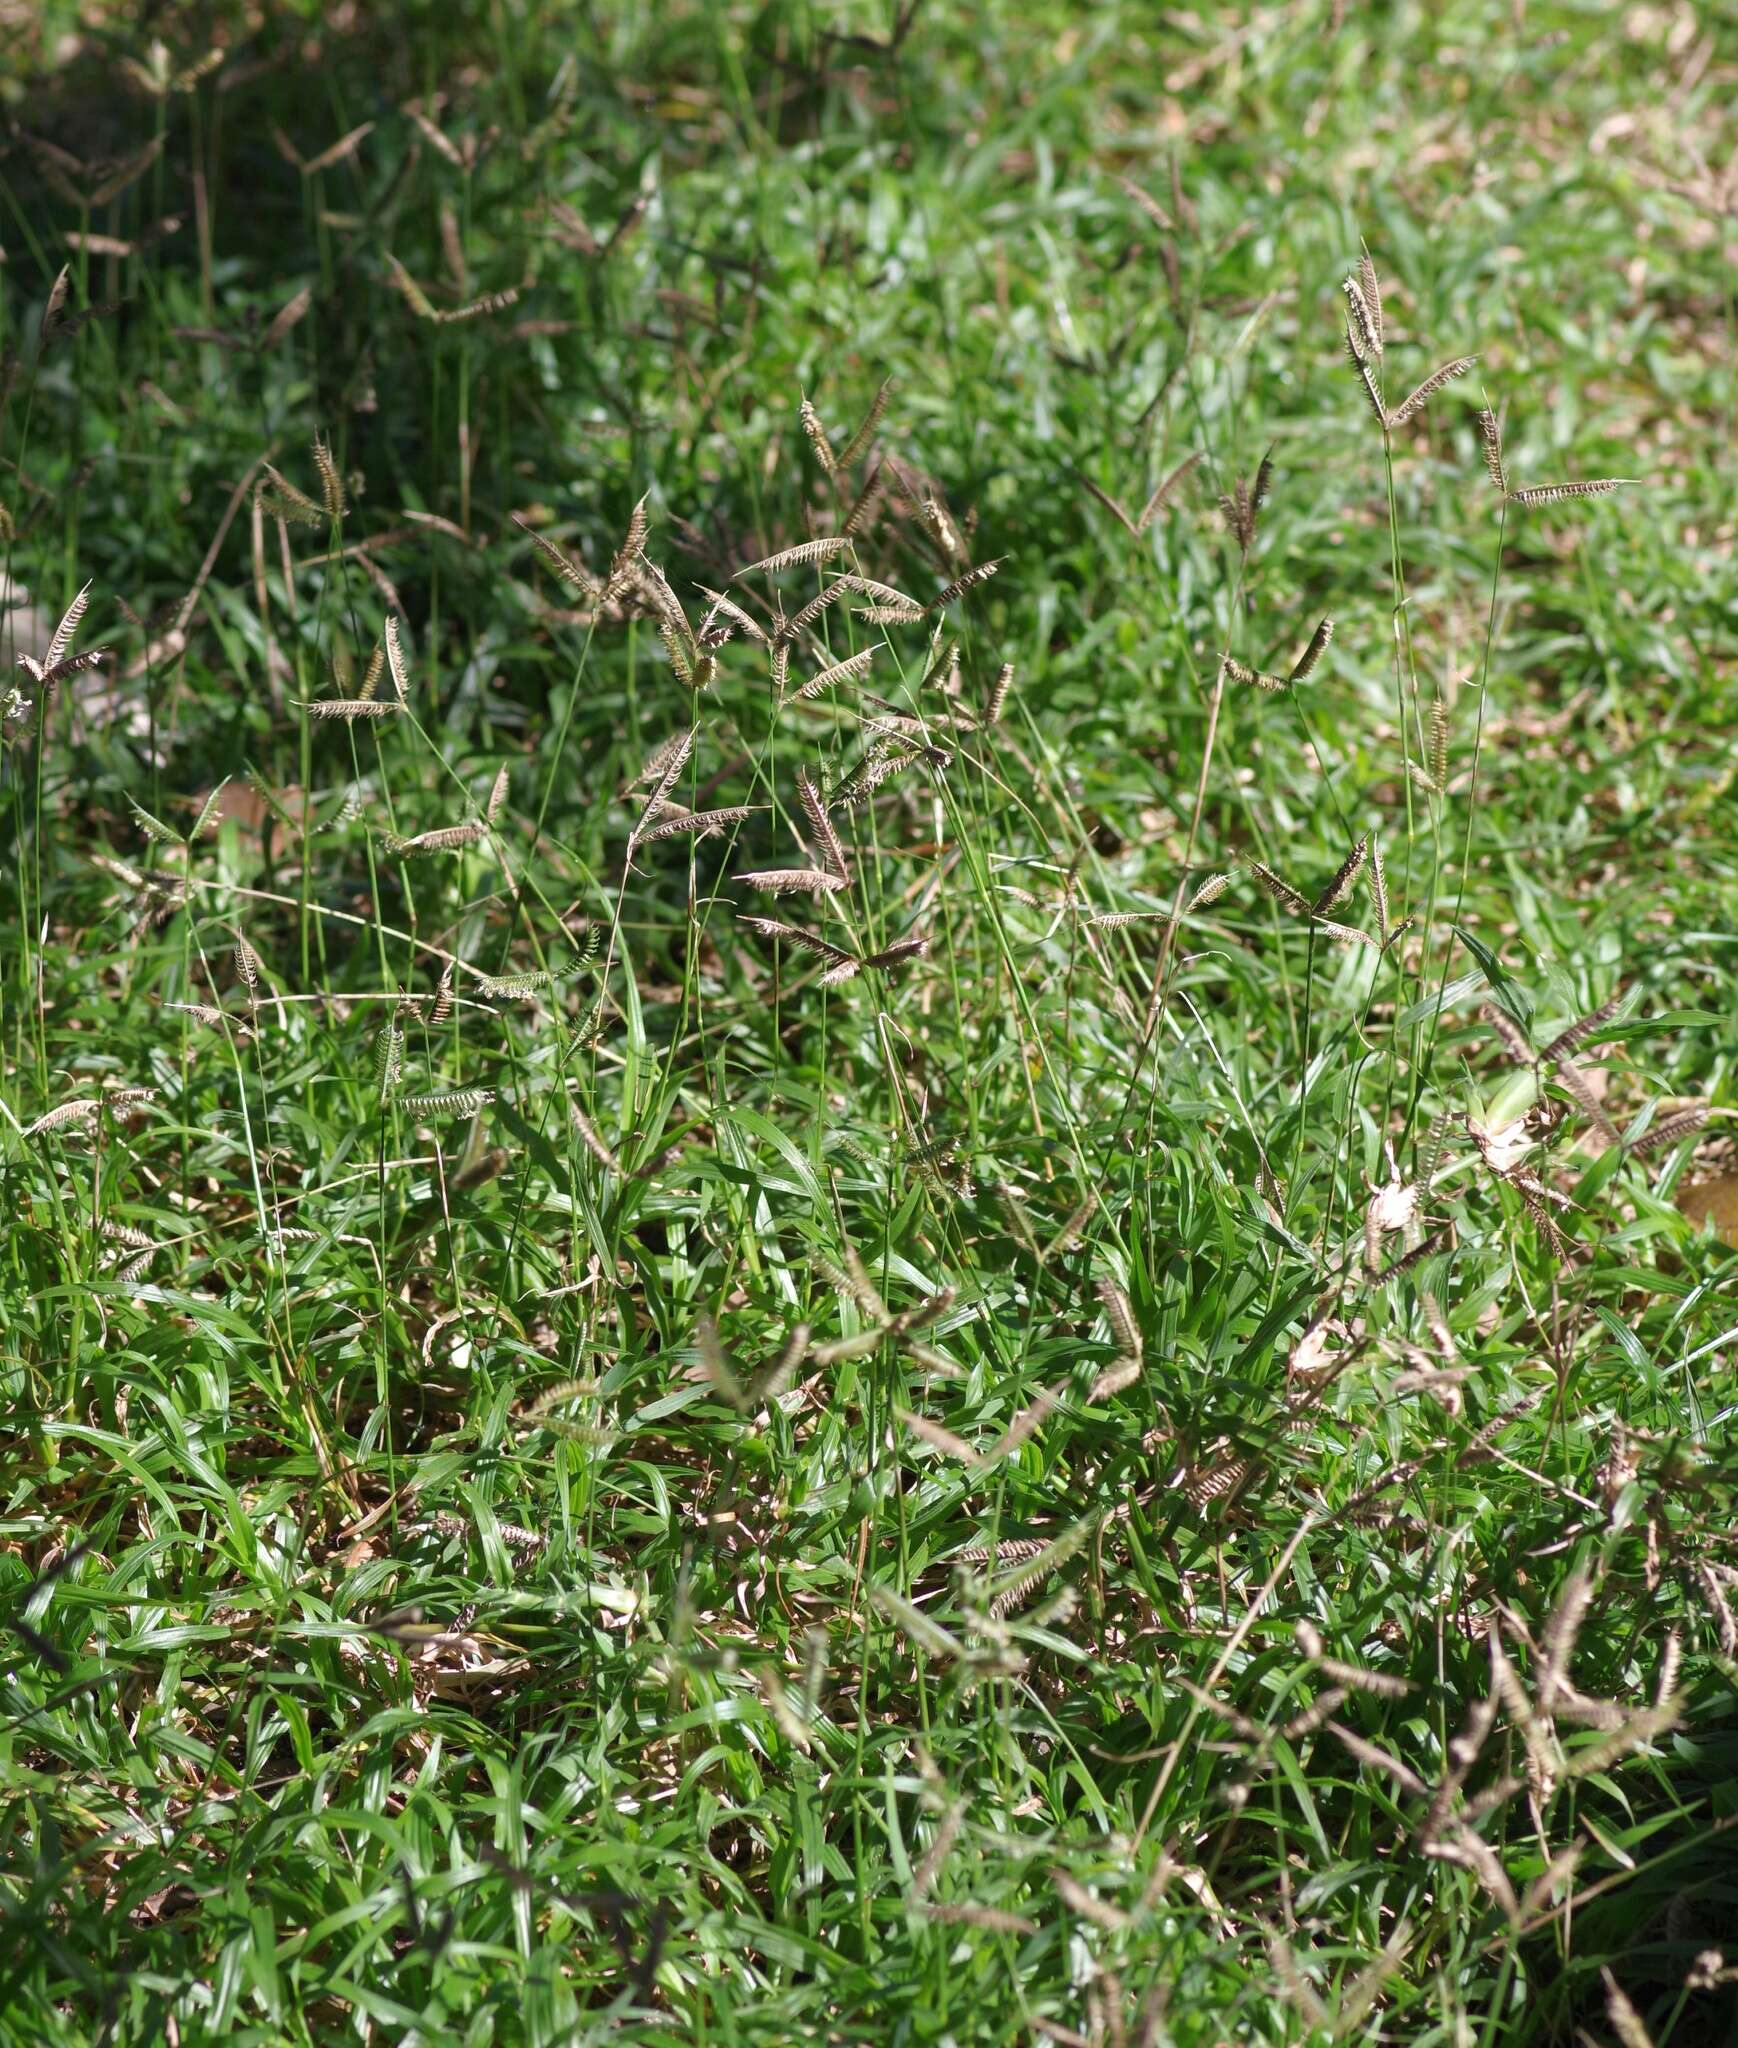 Image of LM grass